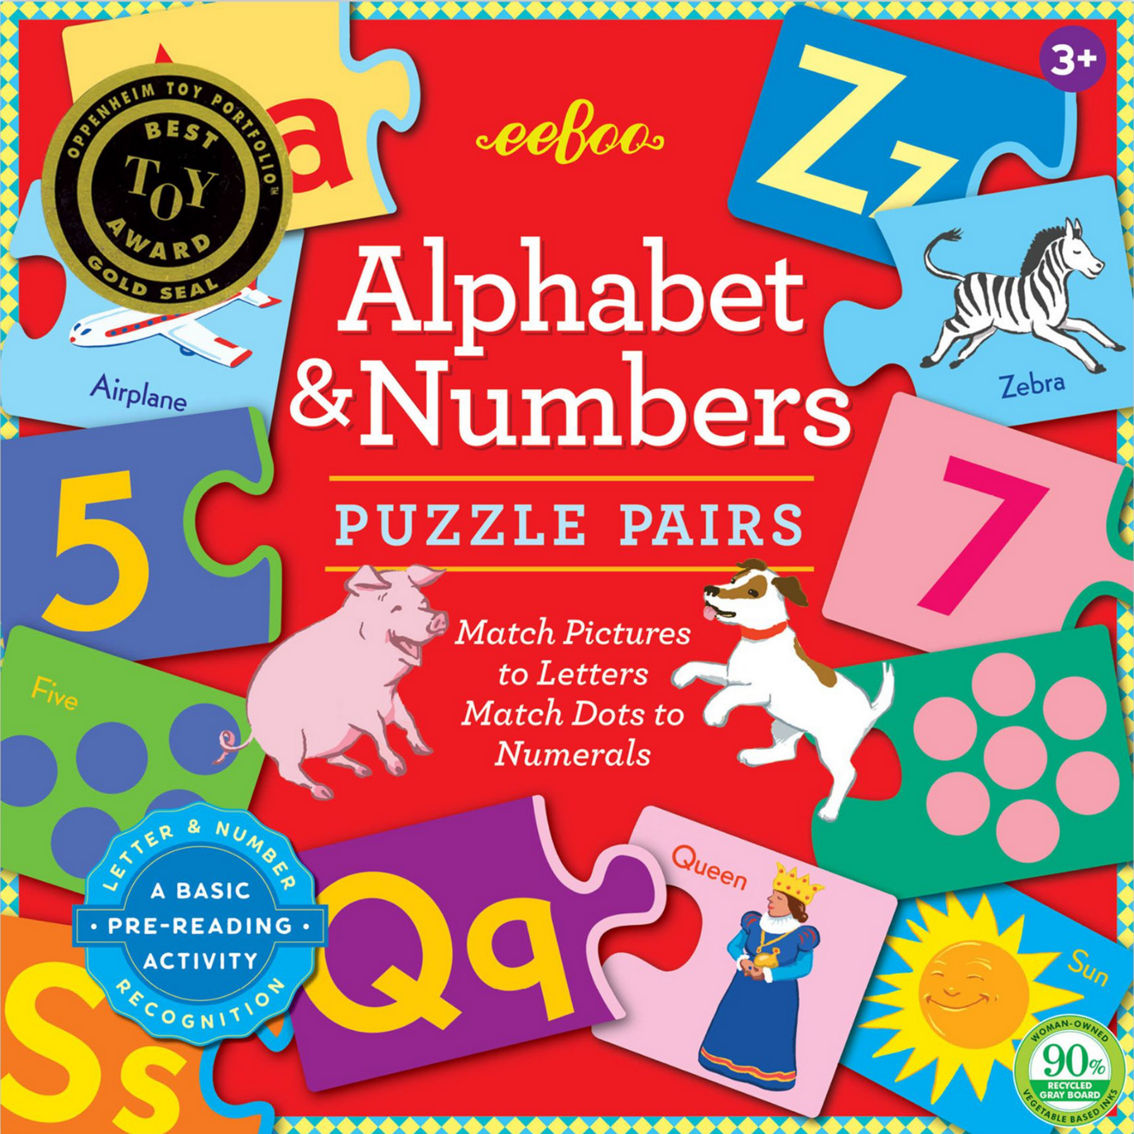 eBoo Alphabet & Numbers Puzzle Pairs - Image 2 of 4